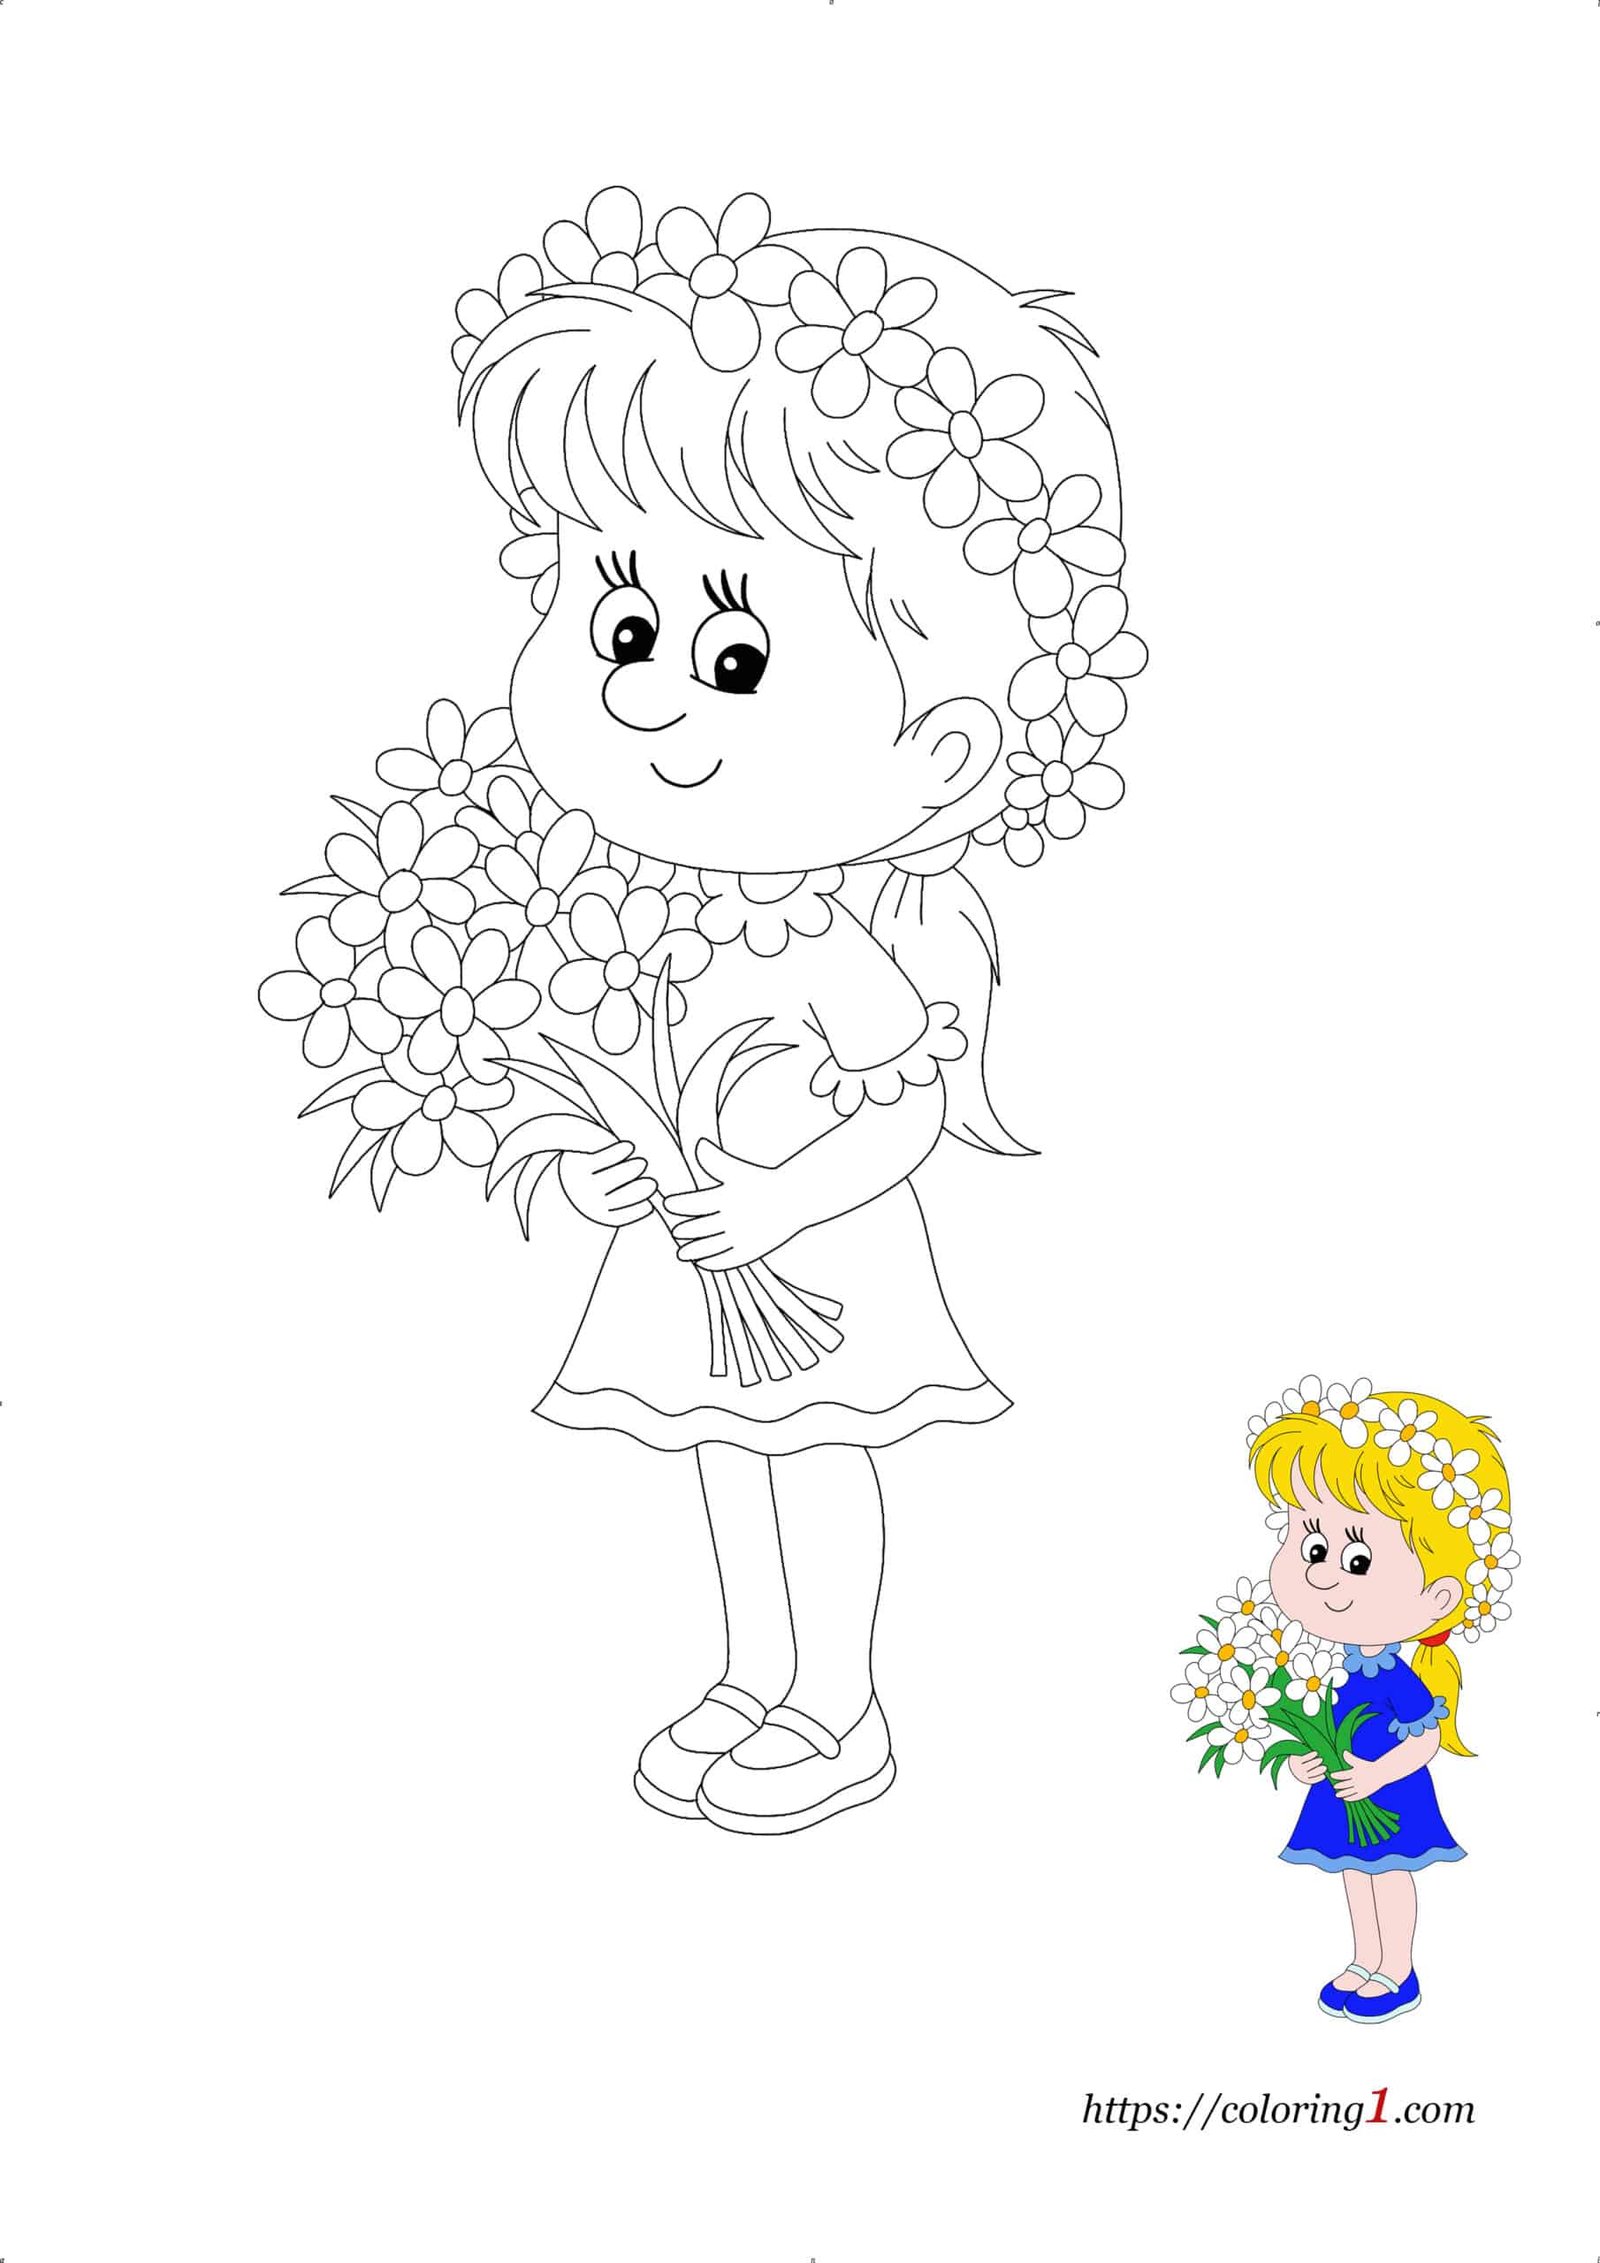 Flower Girl free printable coloring book page for kids